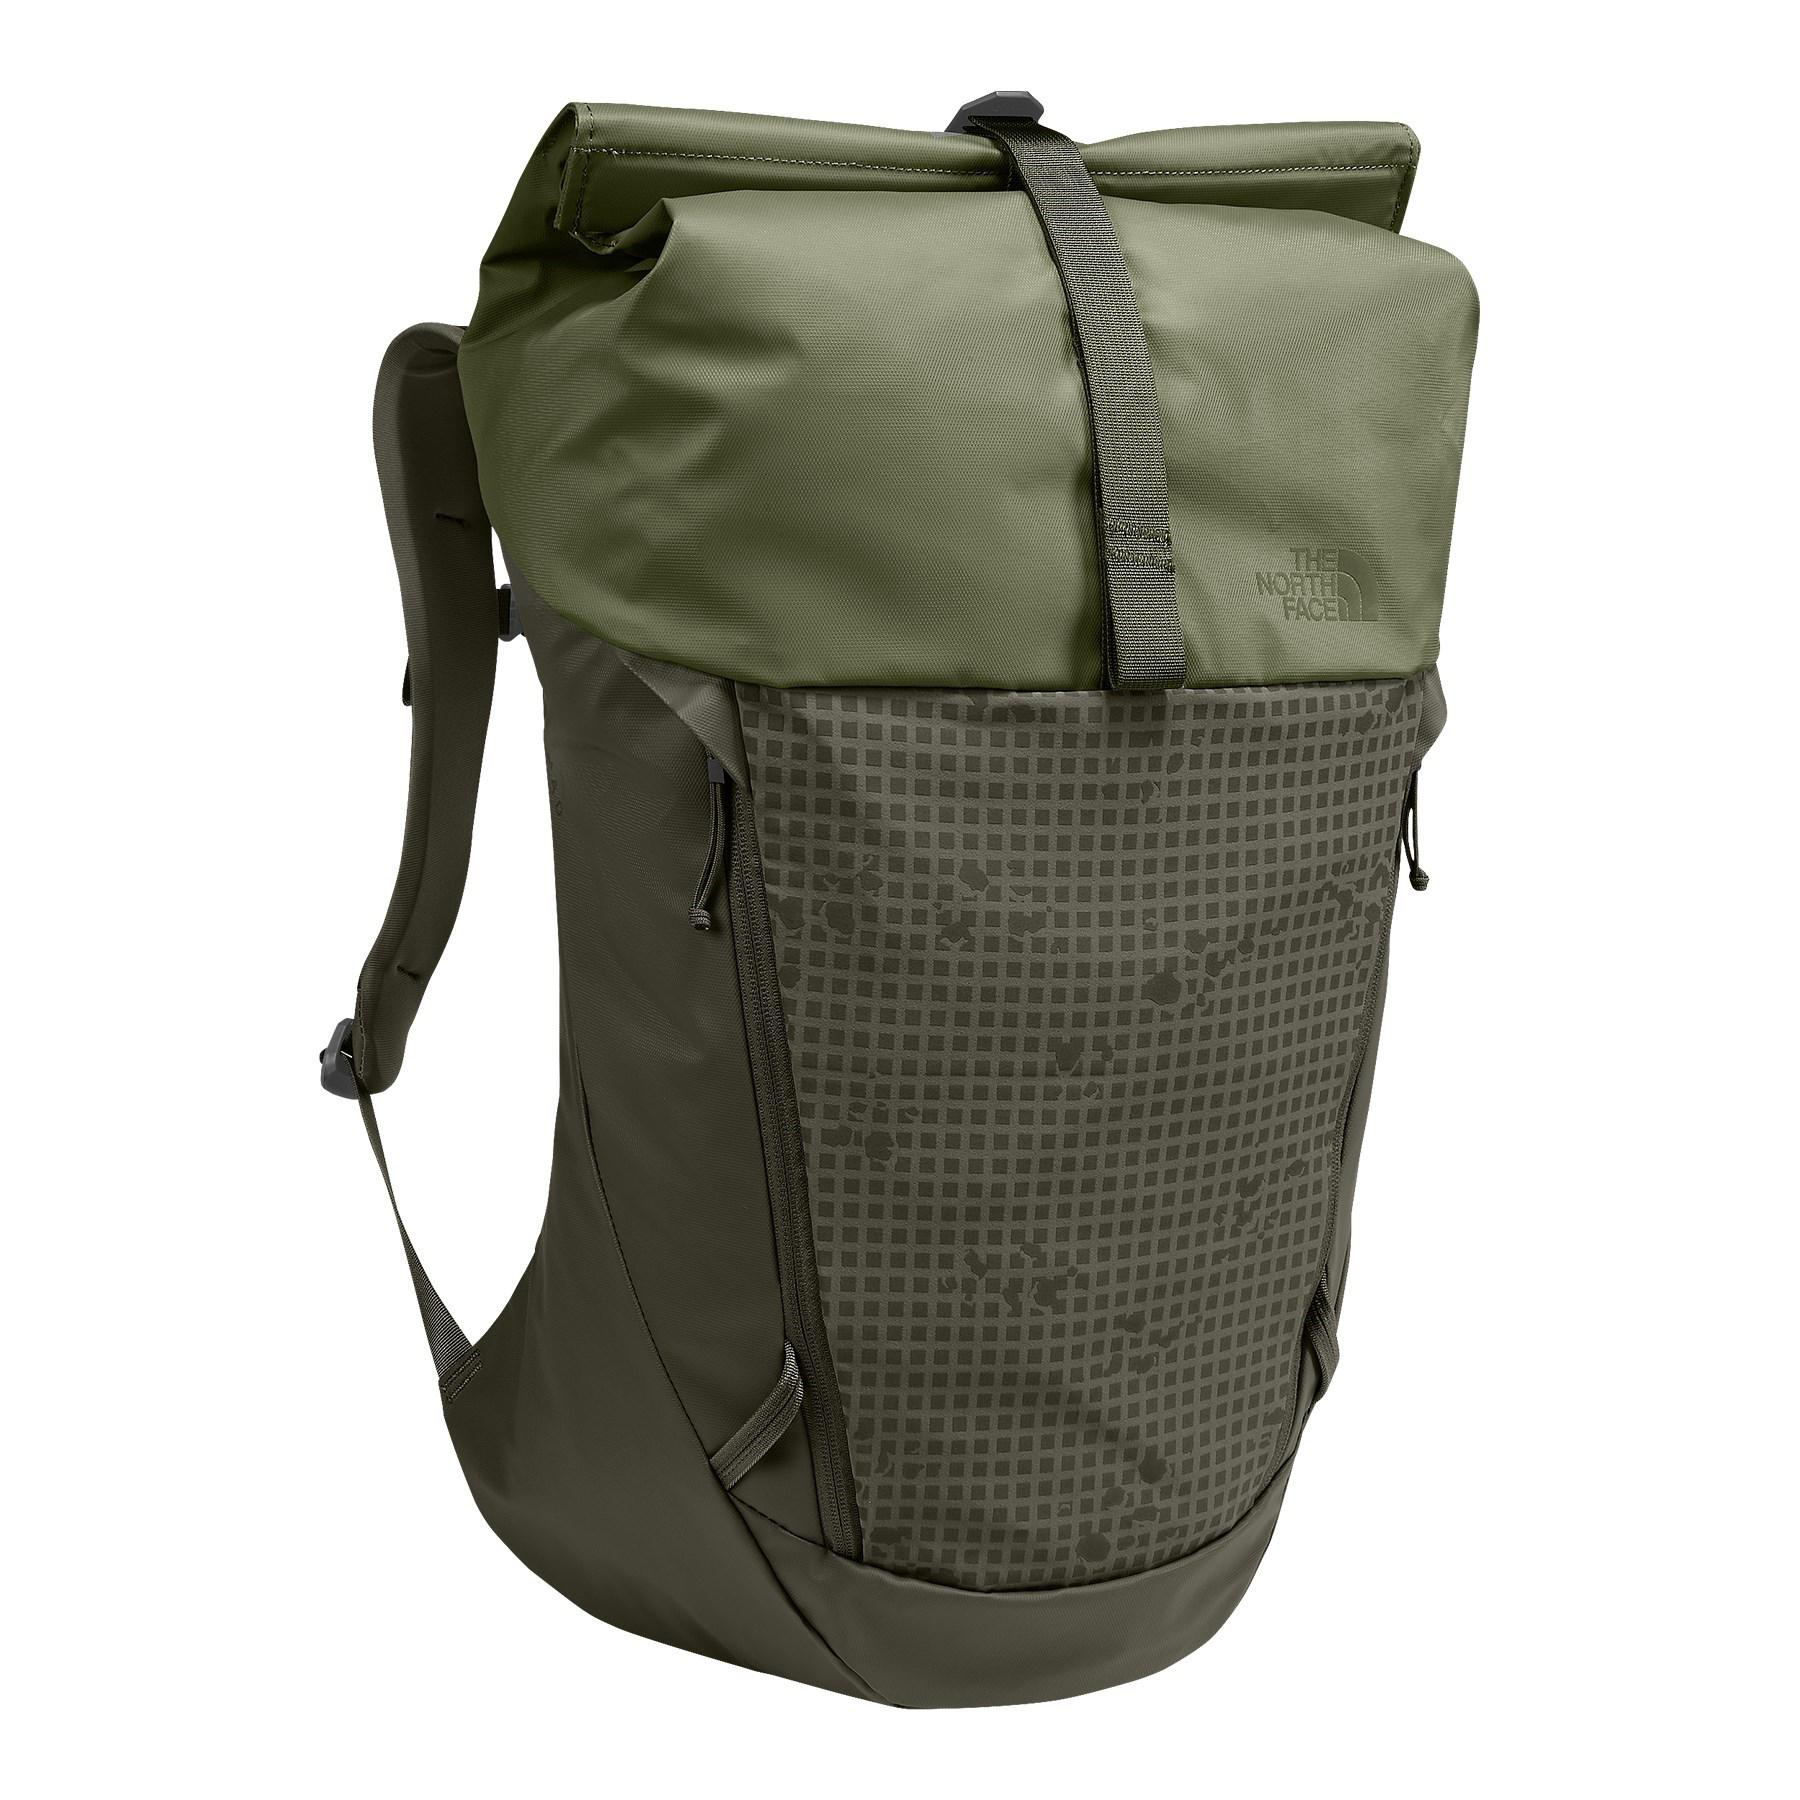 The North Face Fleece Rovara 27l Backpack in Green for Men - Lyst